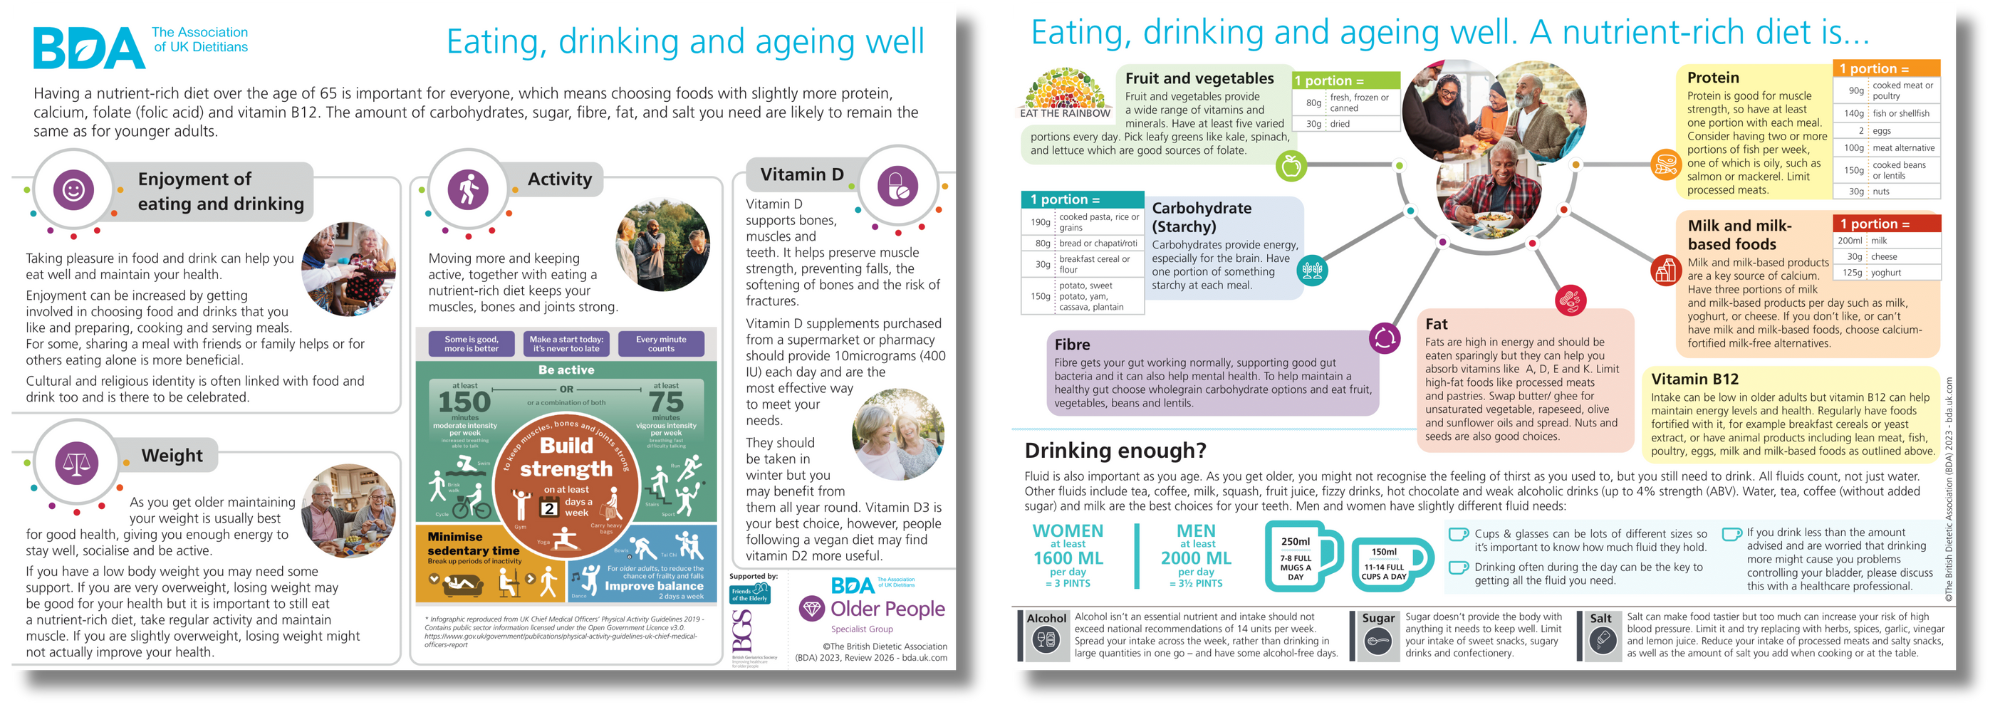 Eating, drinking and ageing well